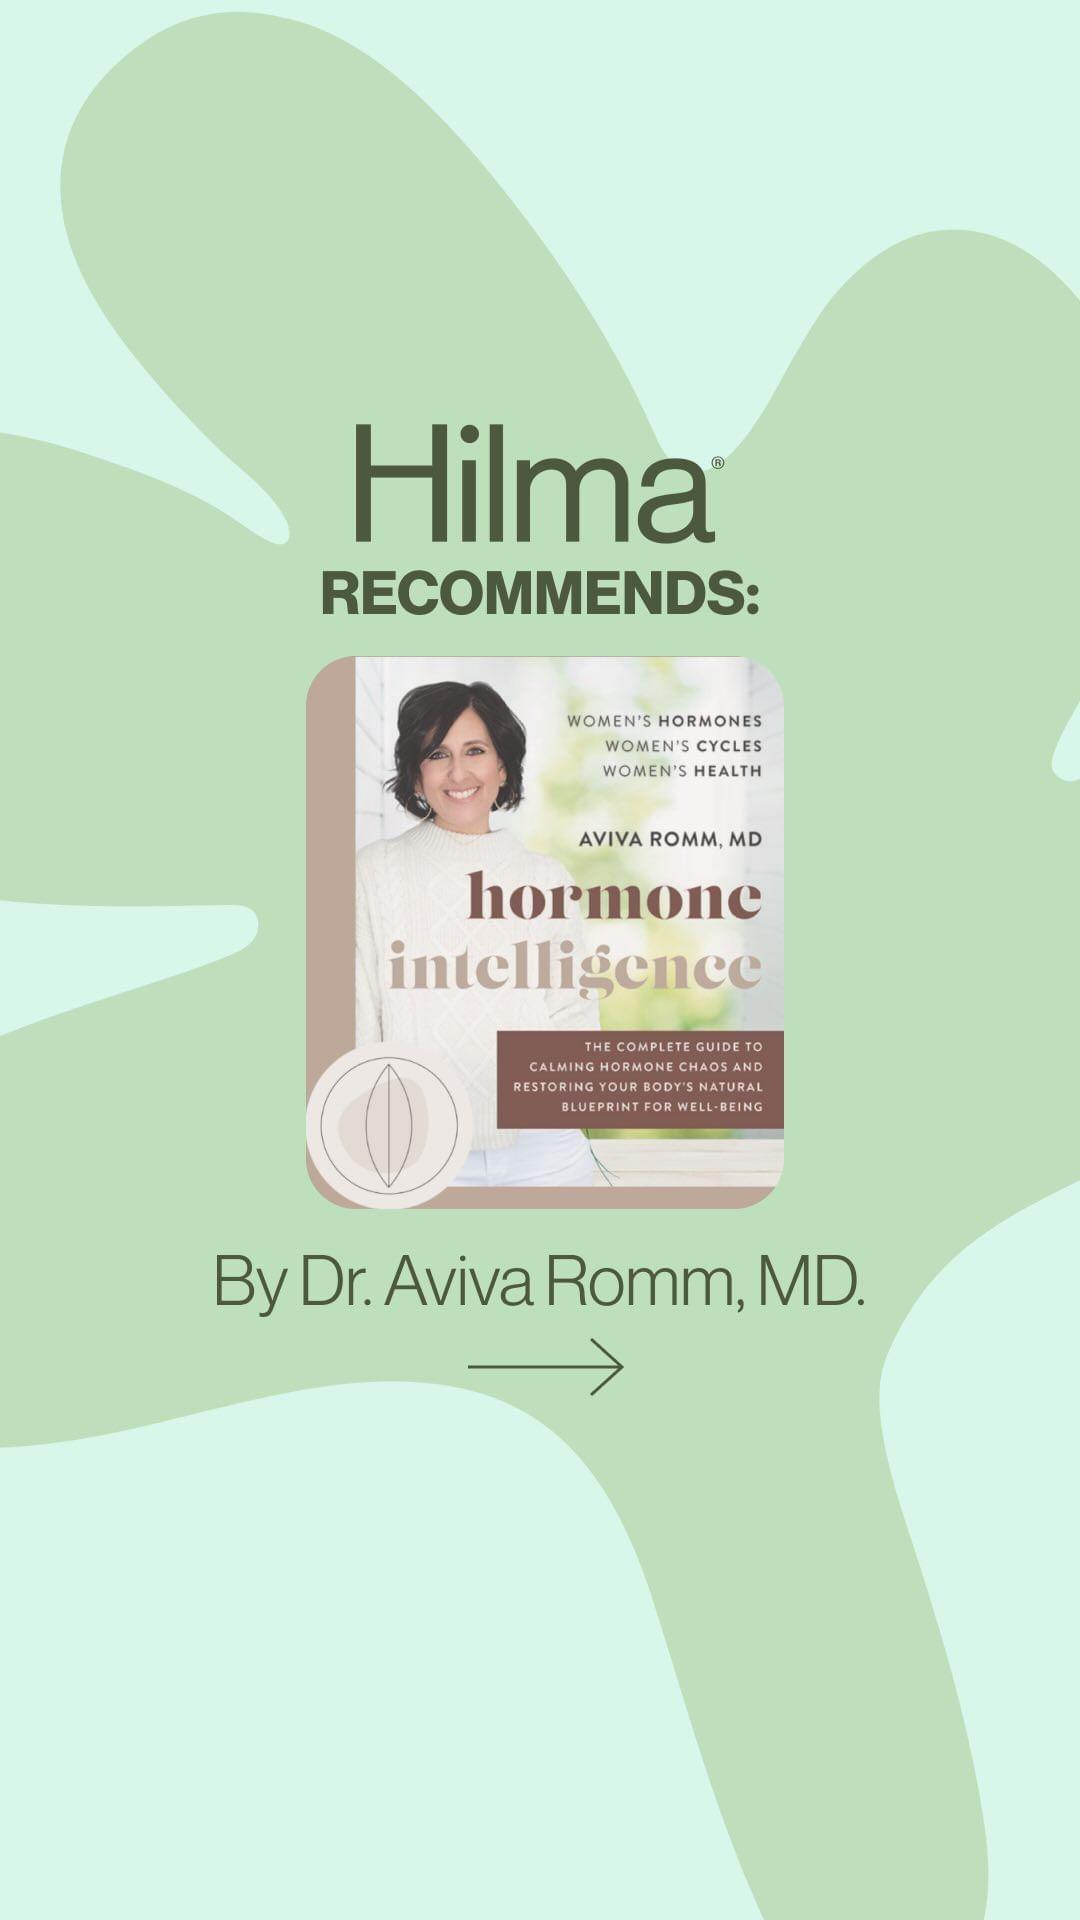 class="content__text"
 This week’s #HilmaRecommends: Hormone Intelligence by @dr.avivaromm 📚
Why we love his book: It breaks down eating for hormone health, the stress-hormone connection, gut health &amp; hormones, calming inflammation, and so much more. 

Comment below if you’ve read it or want to! 
 